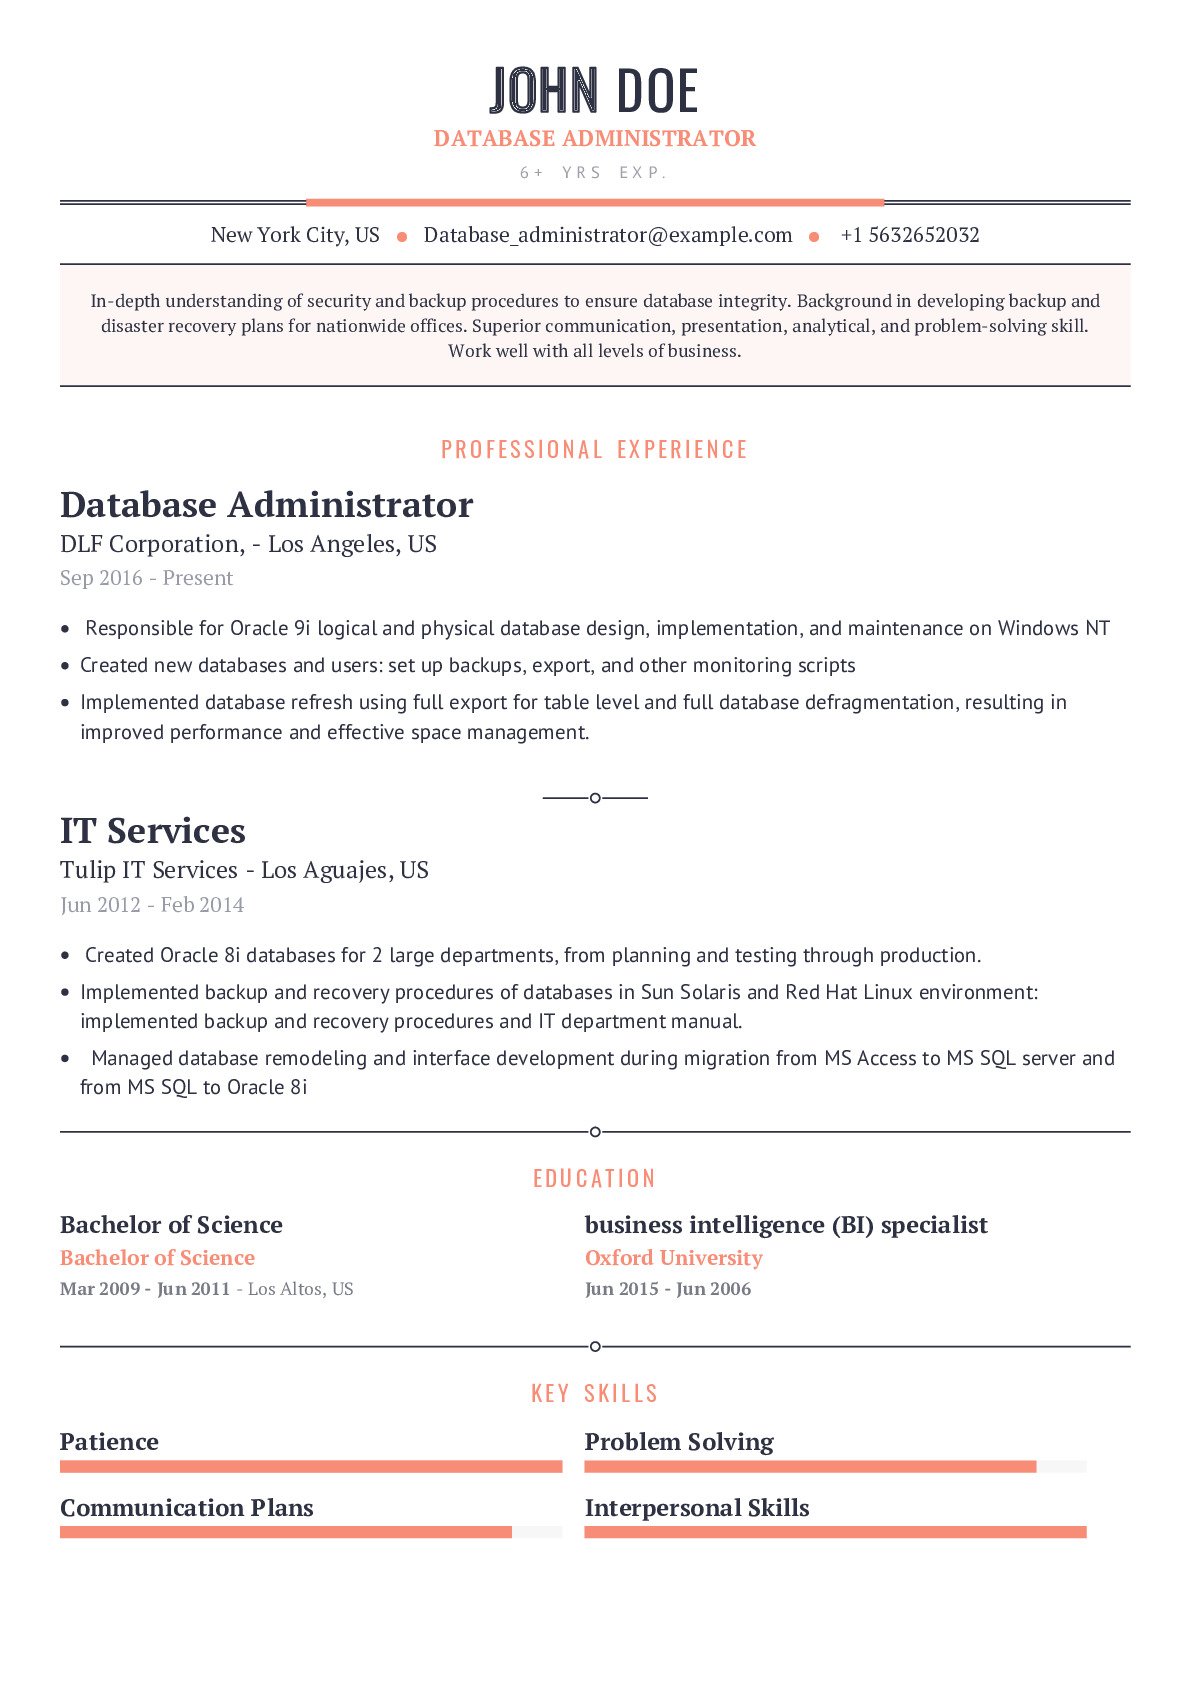 Database Administrator Resume Example With Content Sample ...